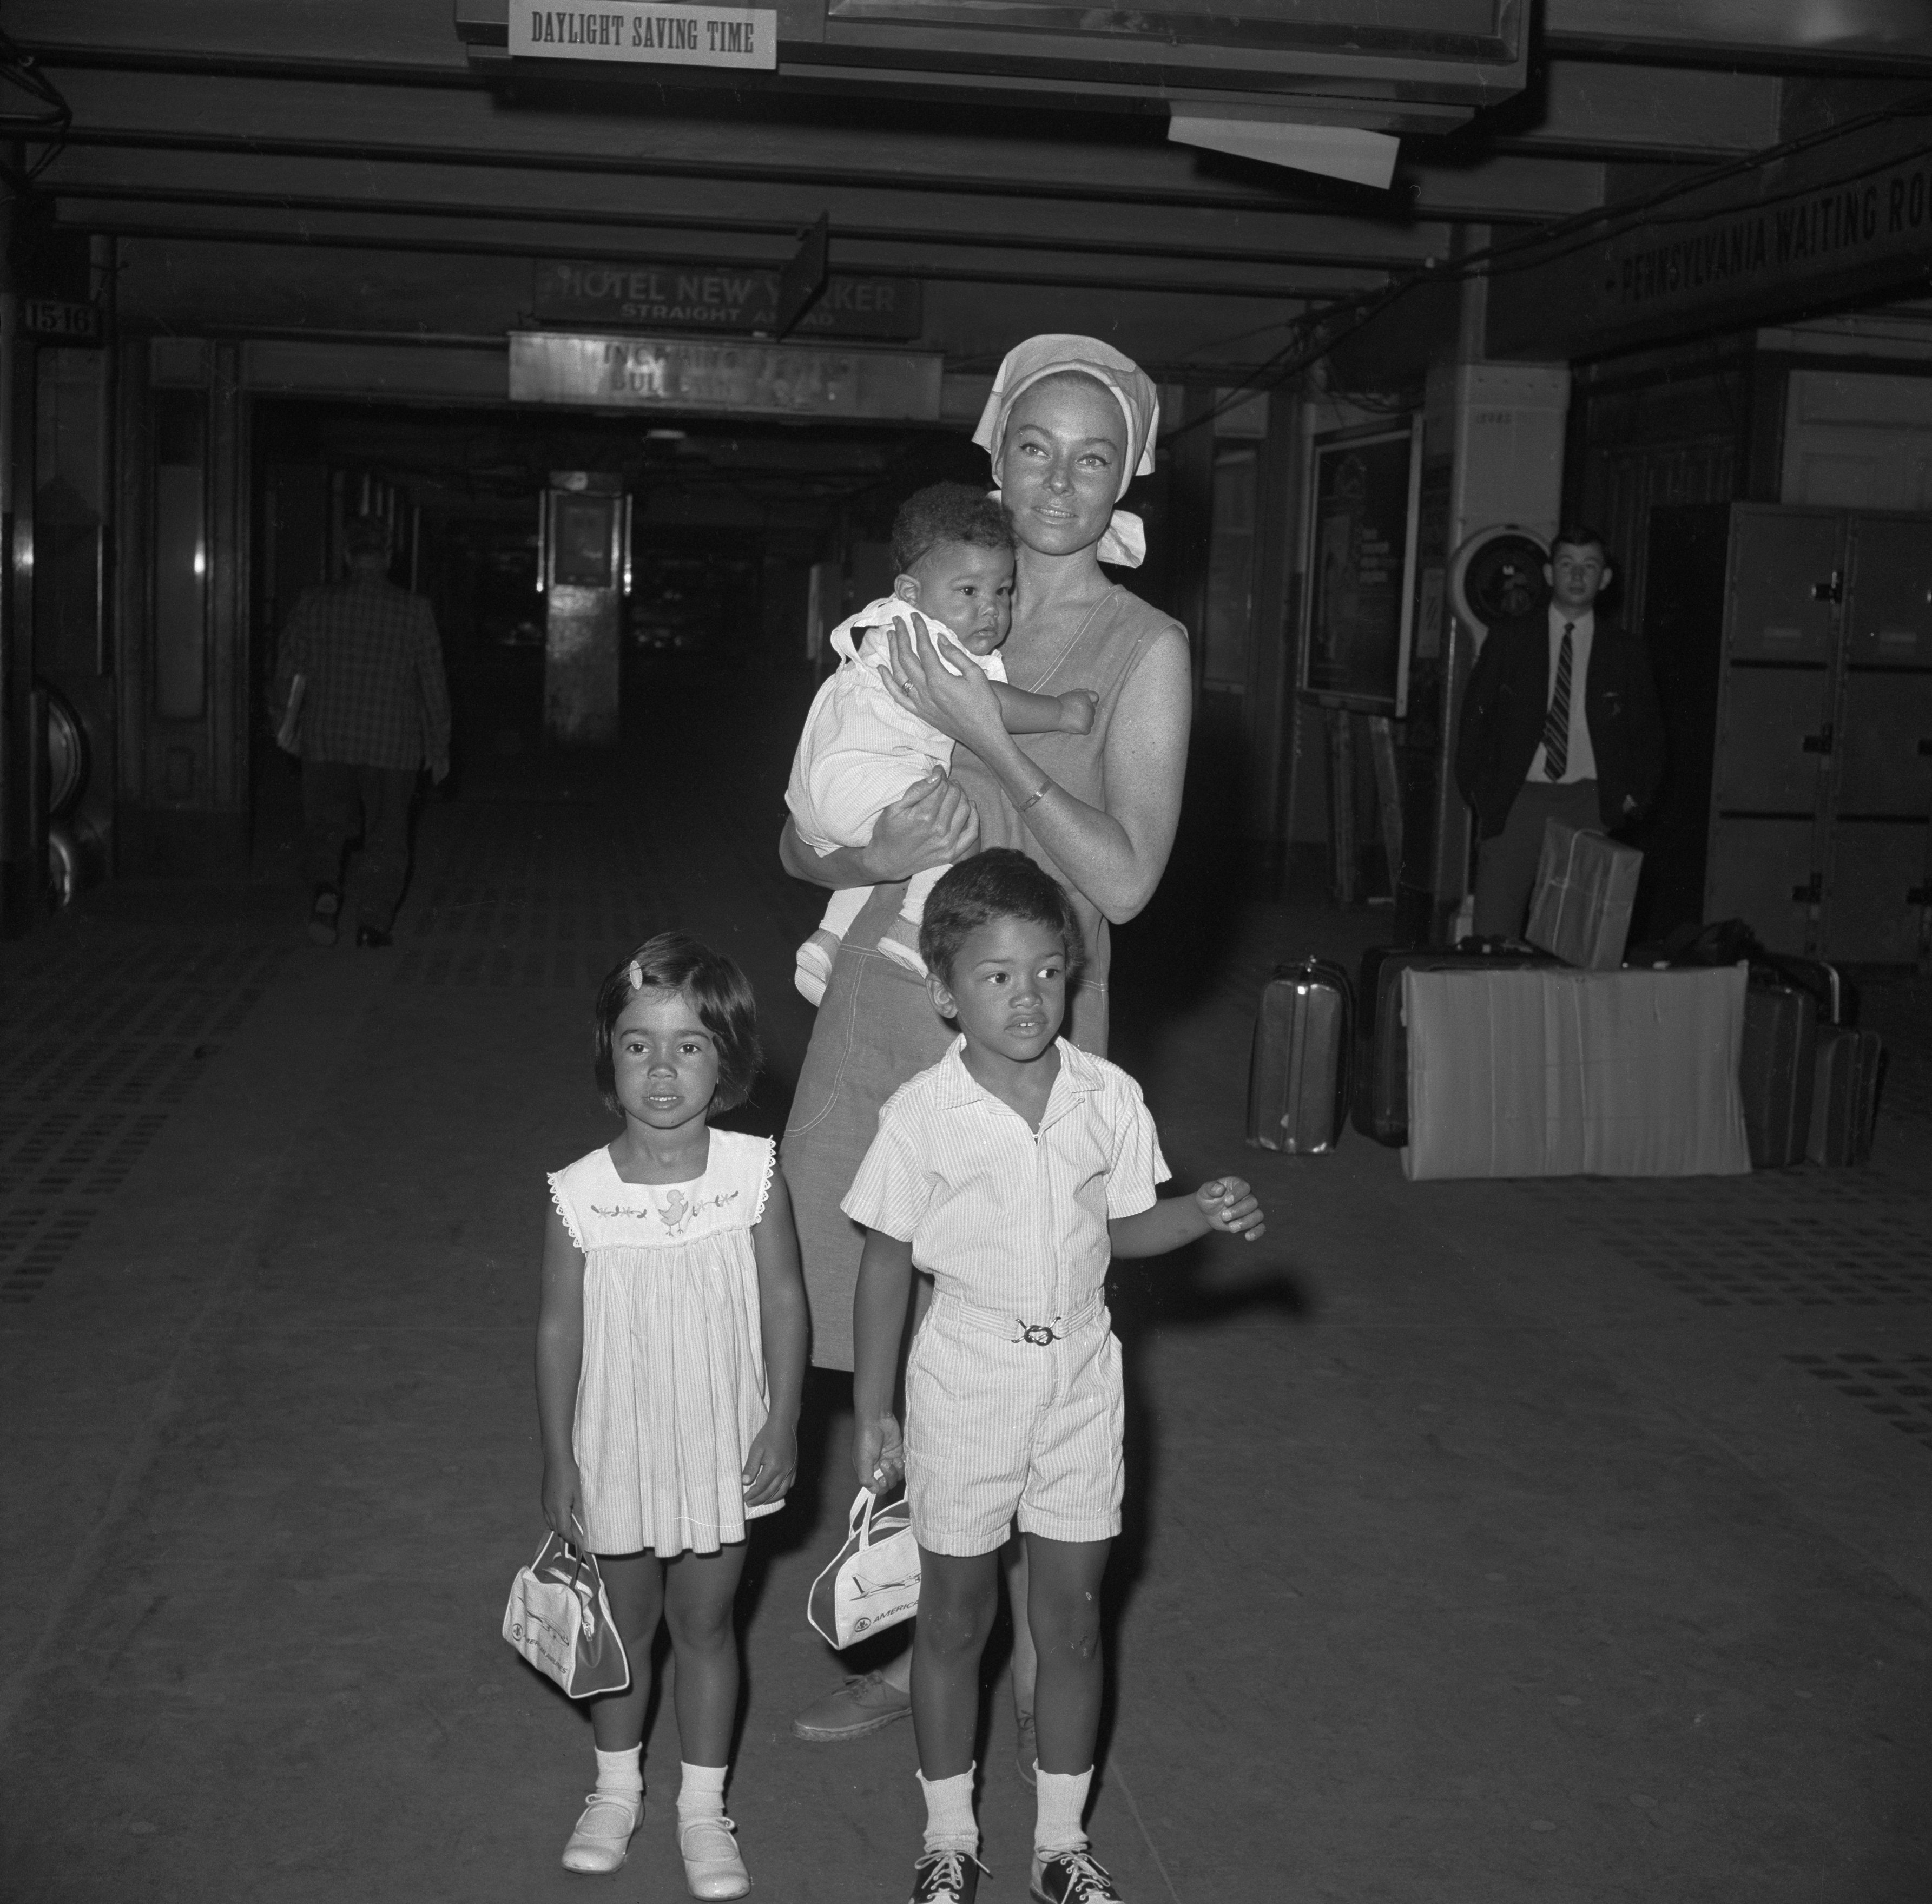 Mrs. Sammy Davis, Jr., also known as May Britt is with her children, Jeff, 6 months old; Tracey, 4 years old; and Mark, 5 years old. | Source: Getty Images